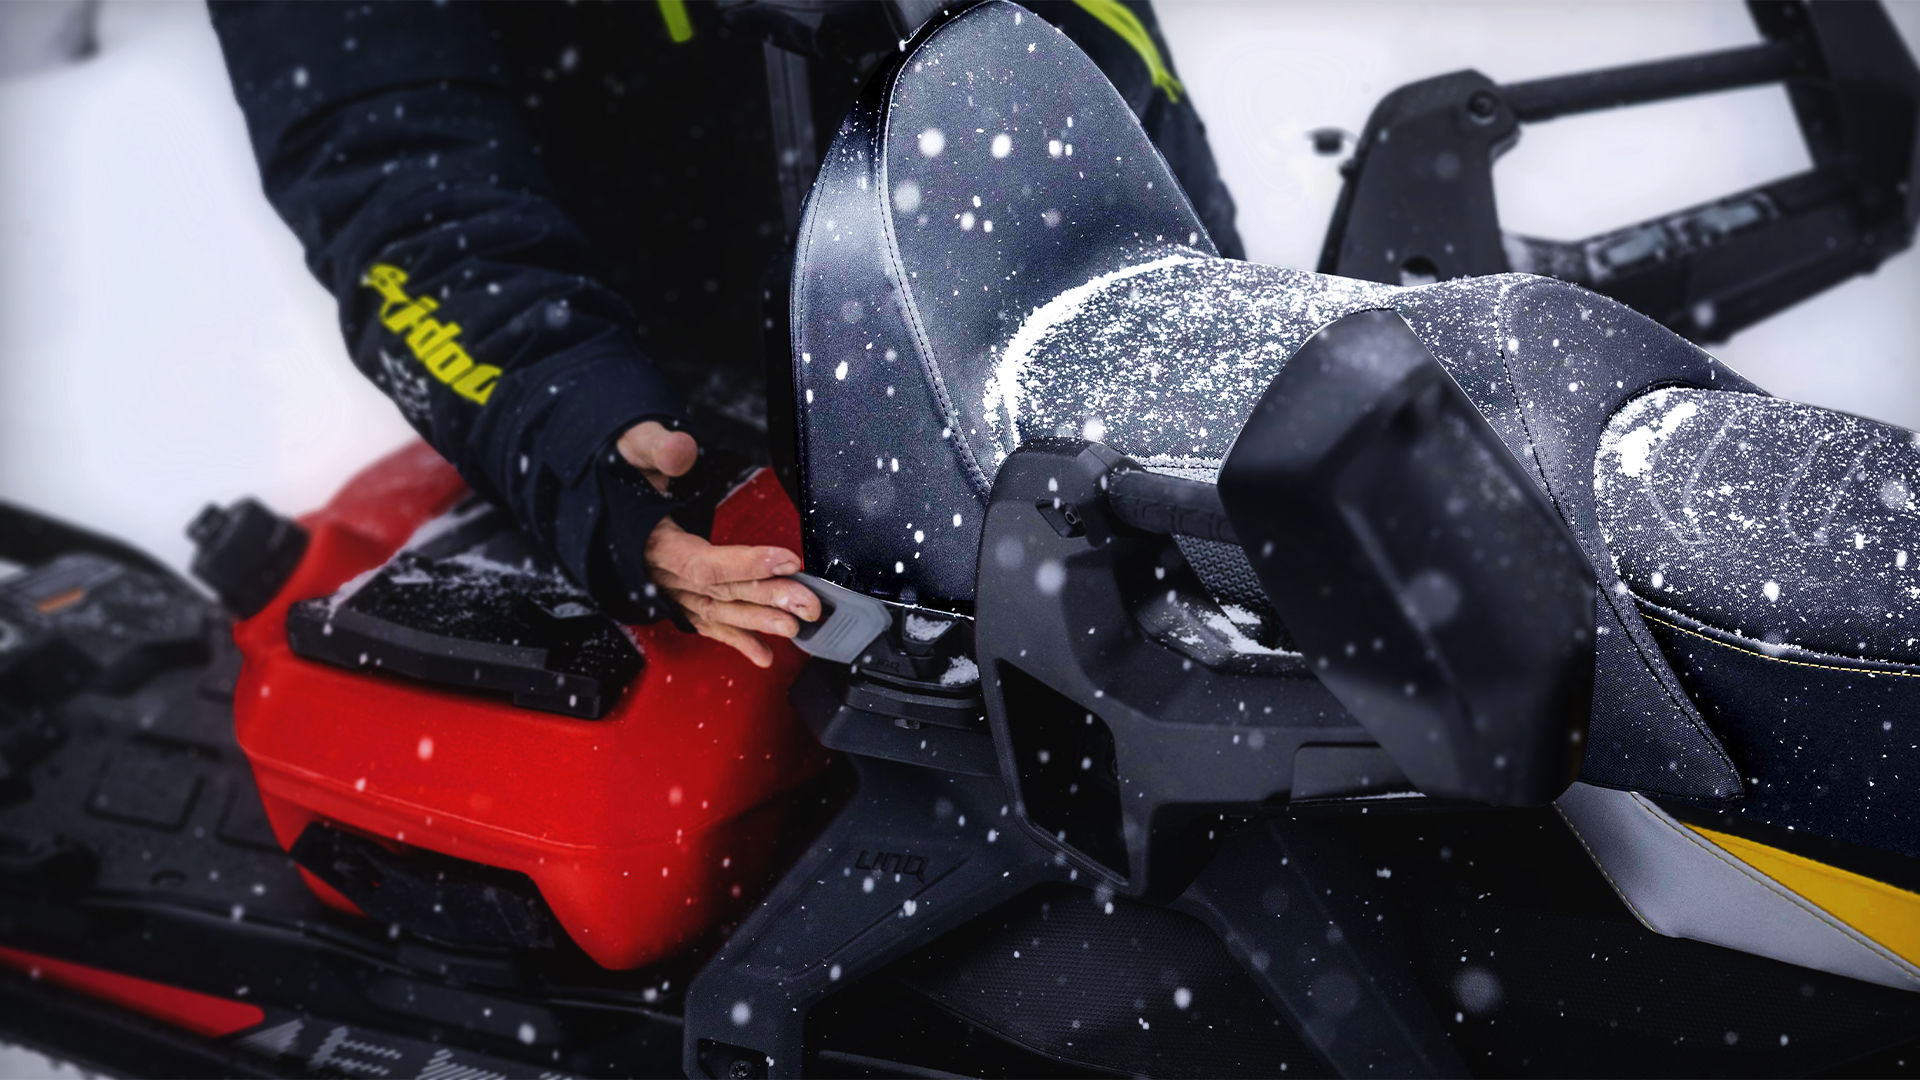 Women clipping a passenger seat on a Ski-Doo snowmobile